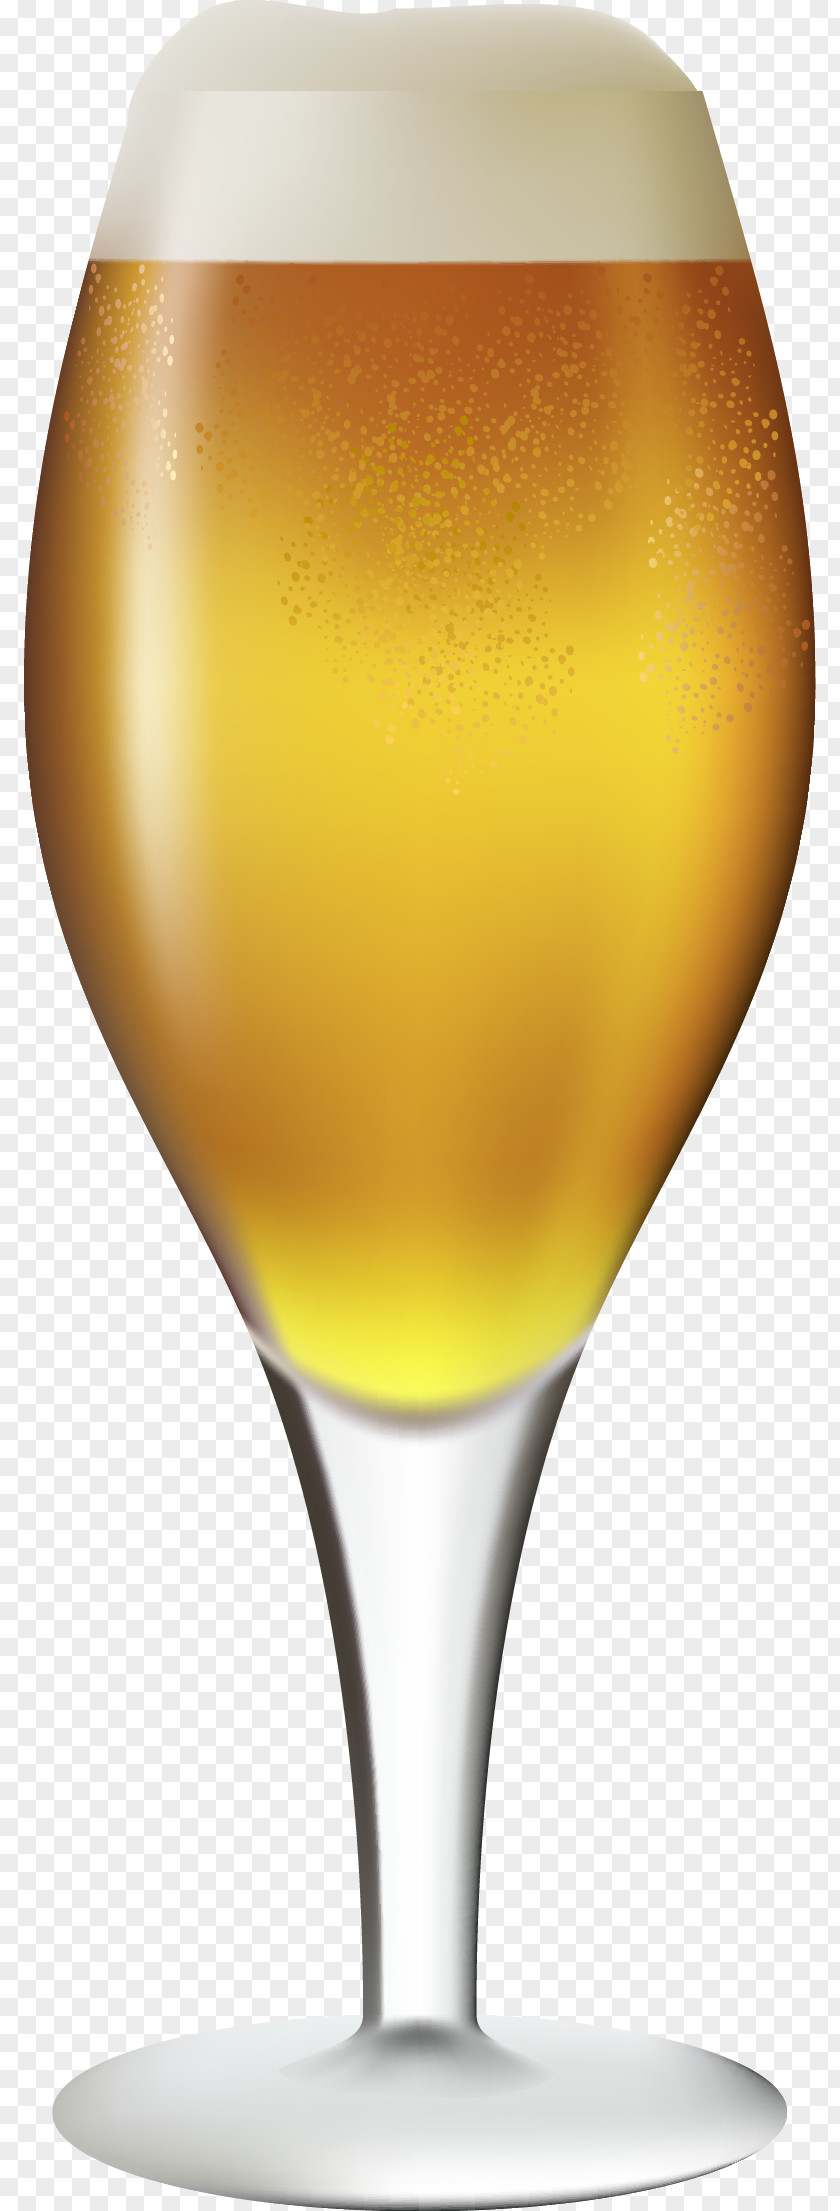 Drinks Beer Cocktail Wine Glass Drink PNG